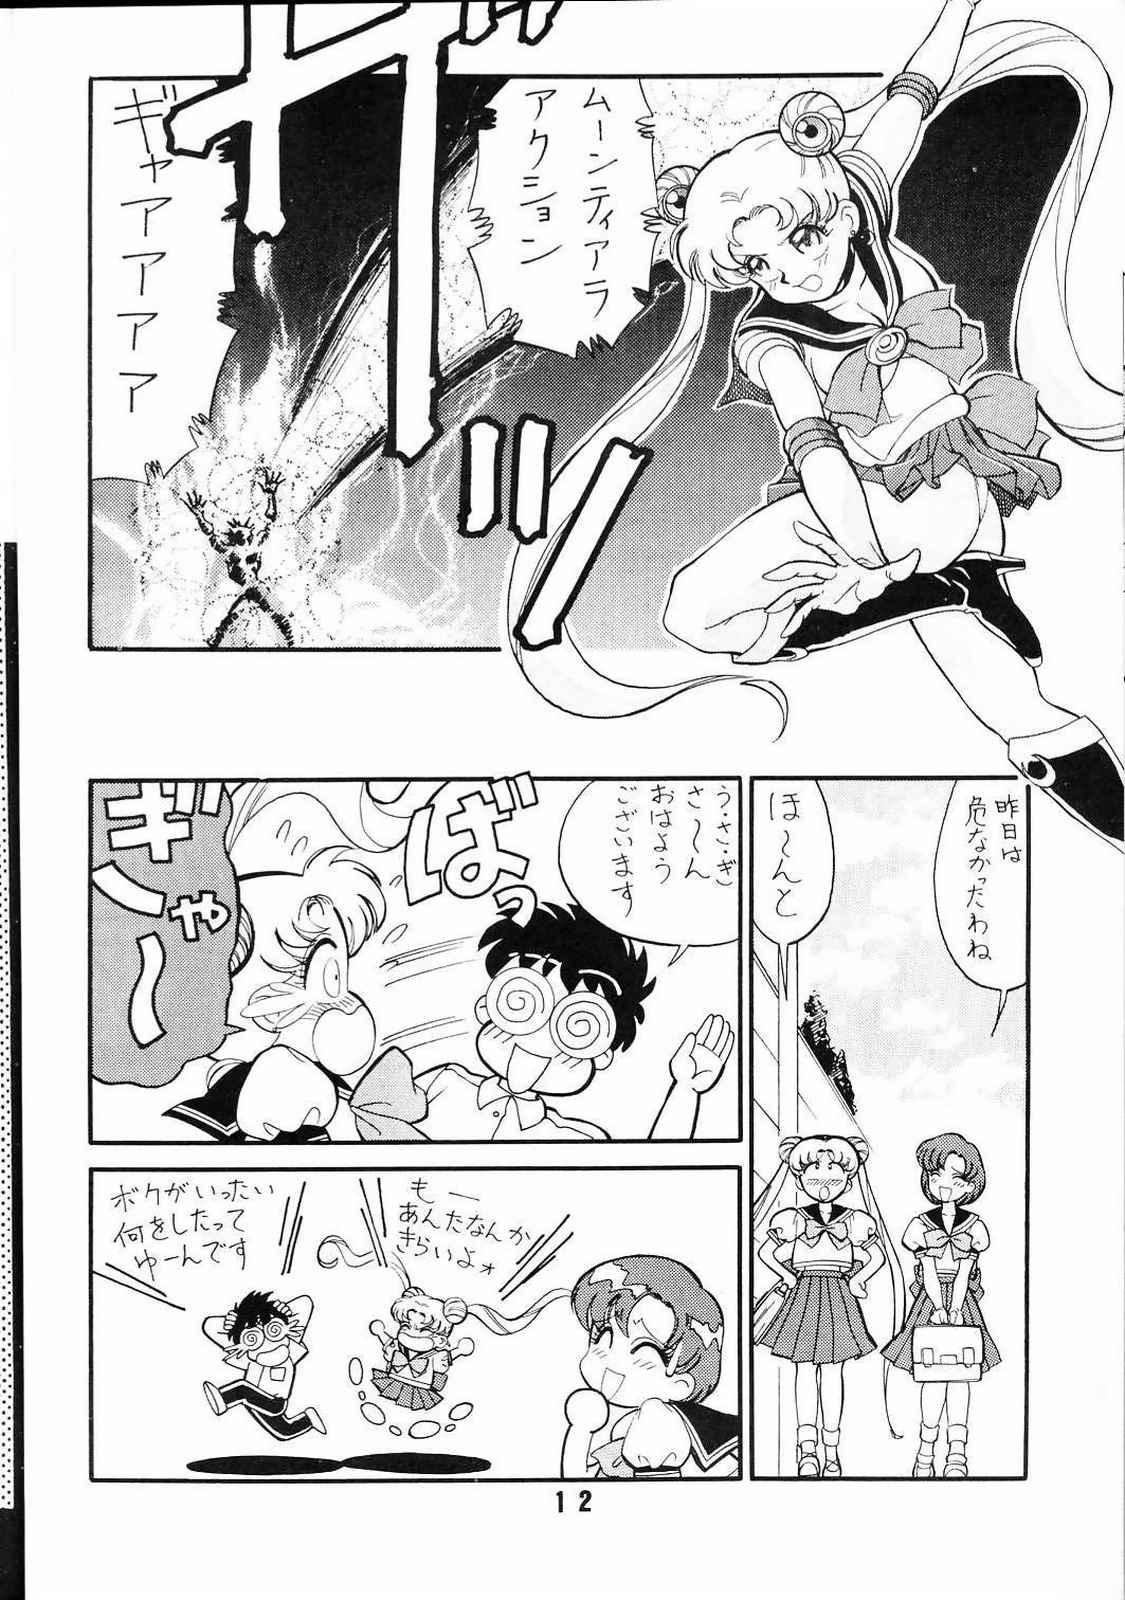 Farting M.F.H.H 2 - Sailor moon 18 Porn - Page 11